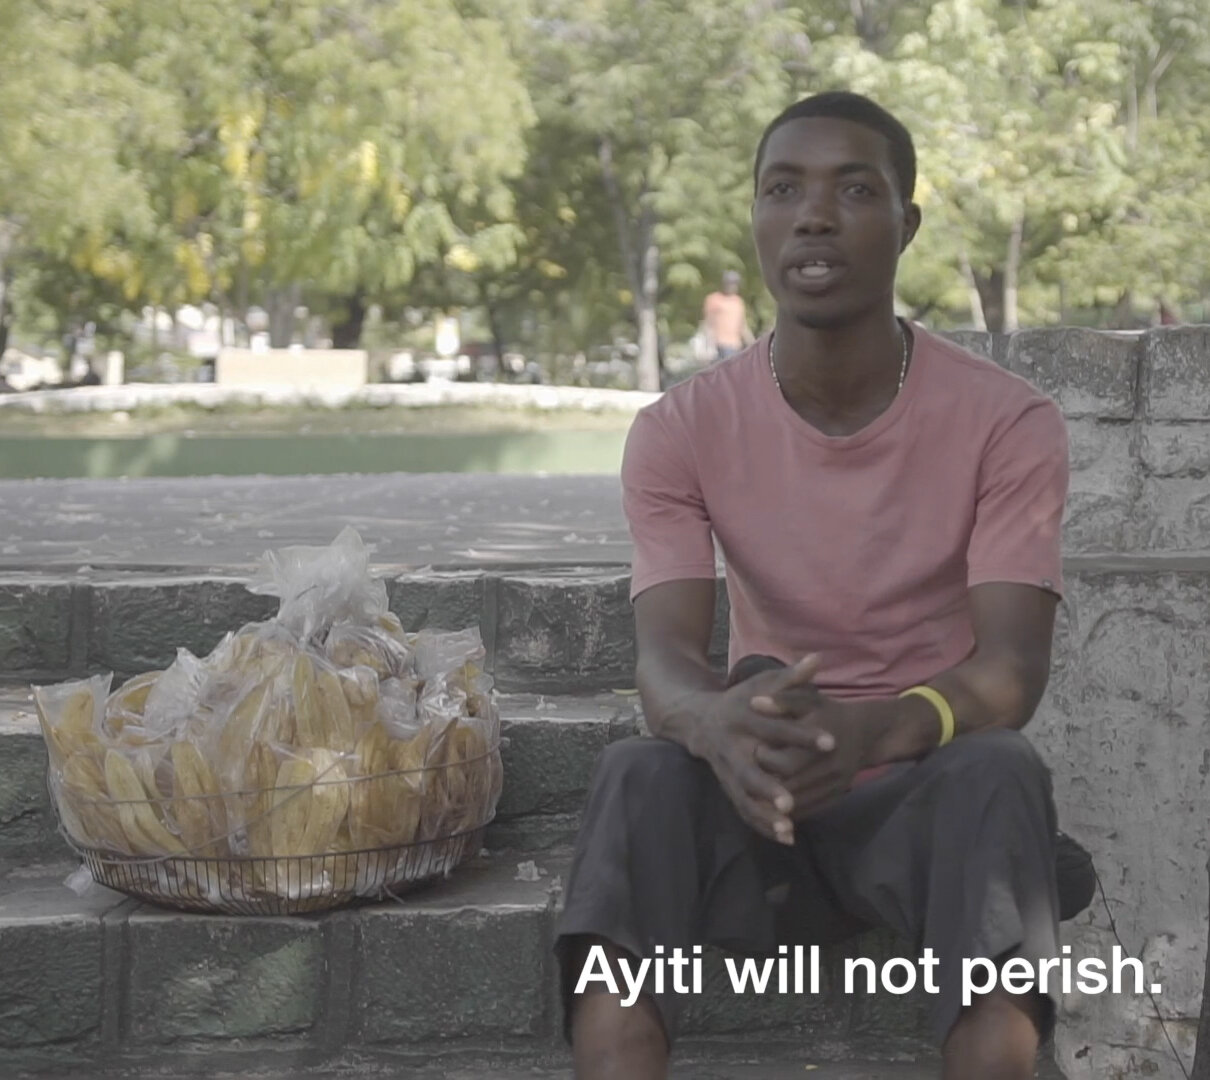 Charlot Lherisson, 25, who sells packaged fruit from 5 a.m. to 6 p.m., believes that Haiti will not perish because it still can change.